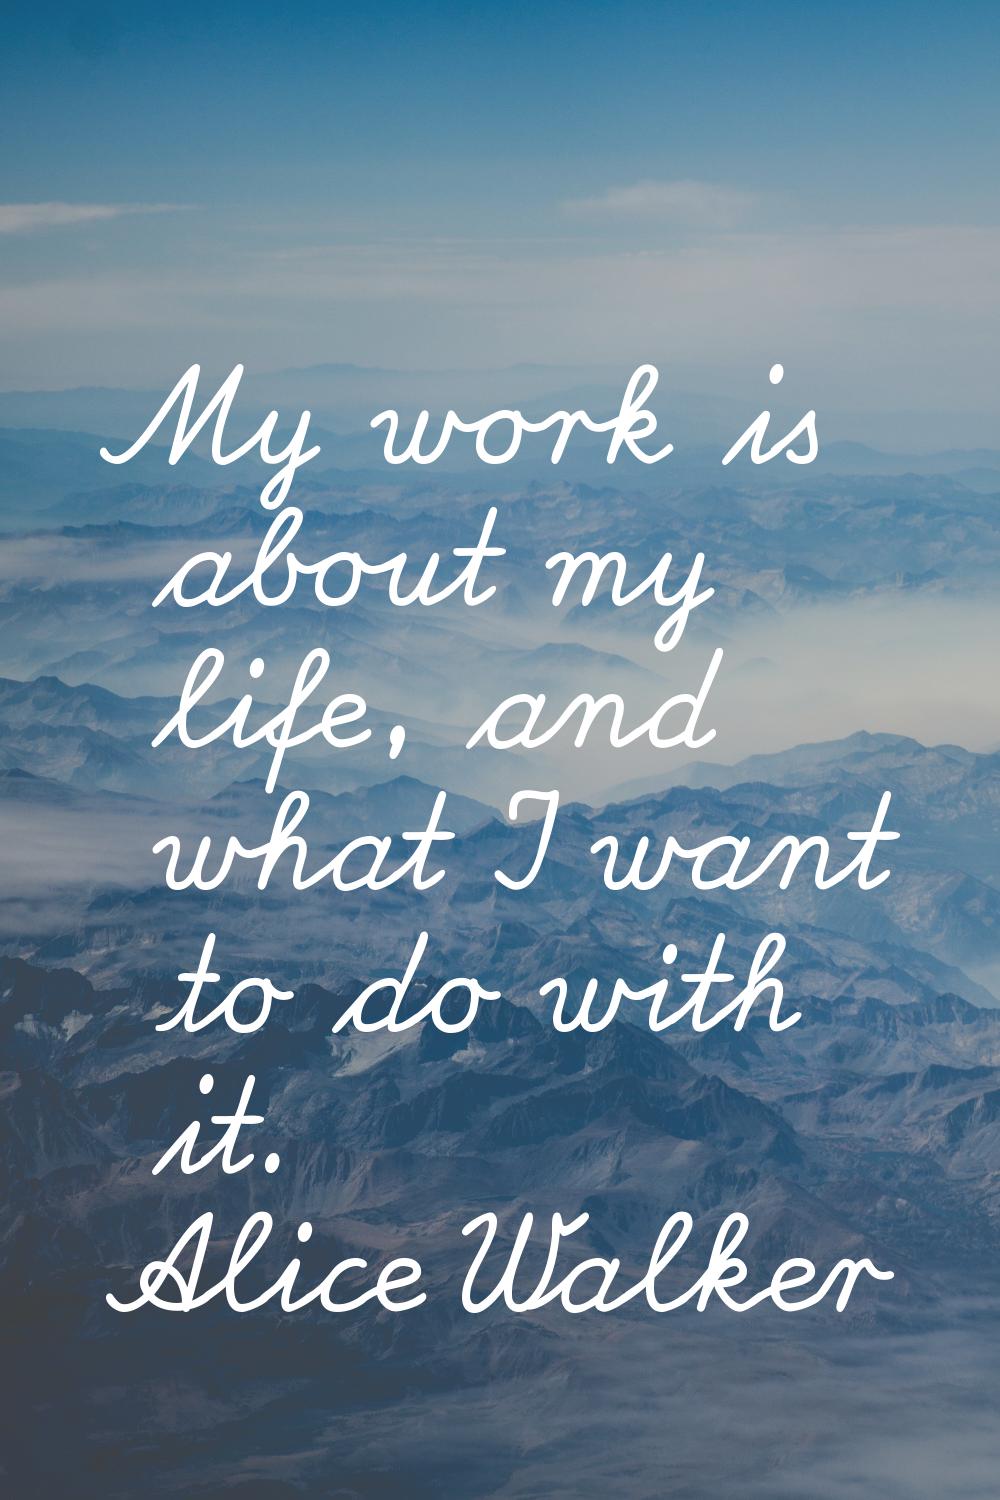 My work is about my life, and what I want to do with it.